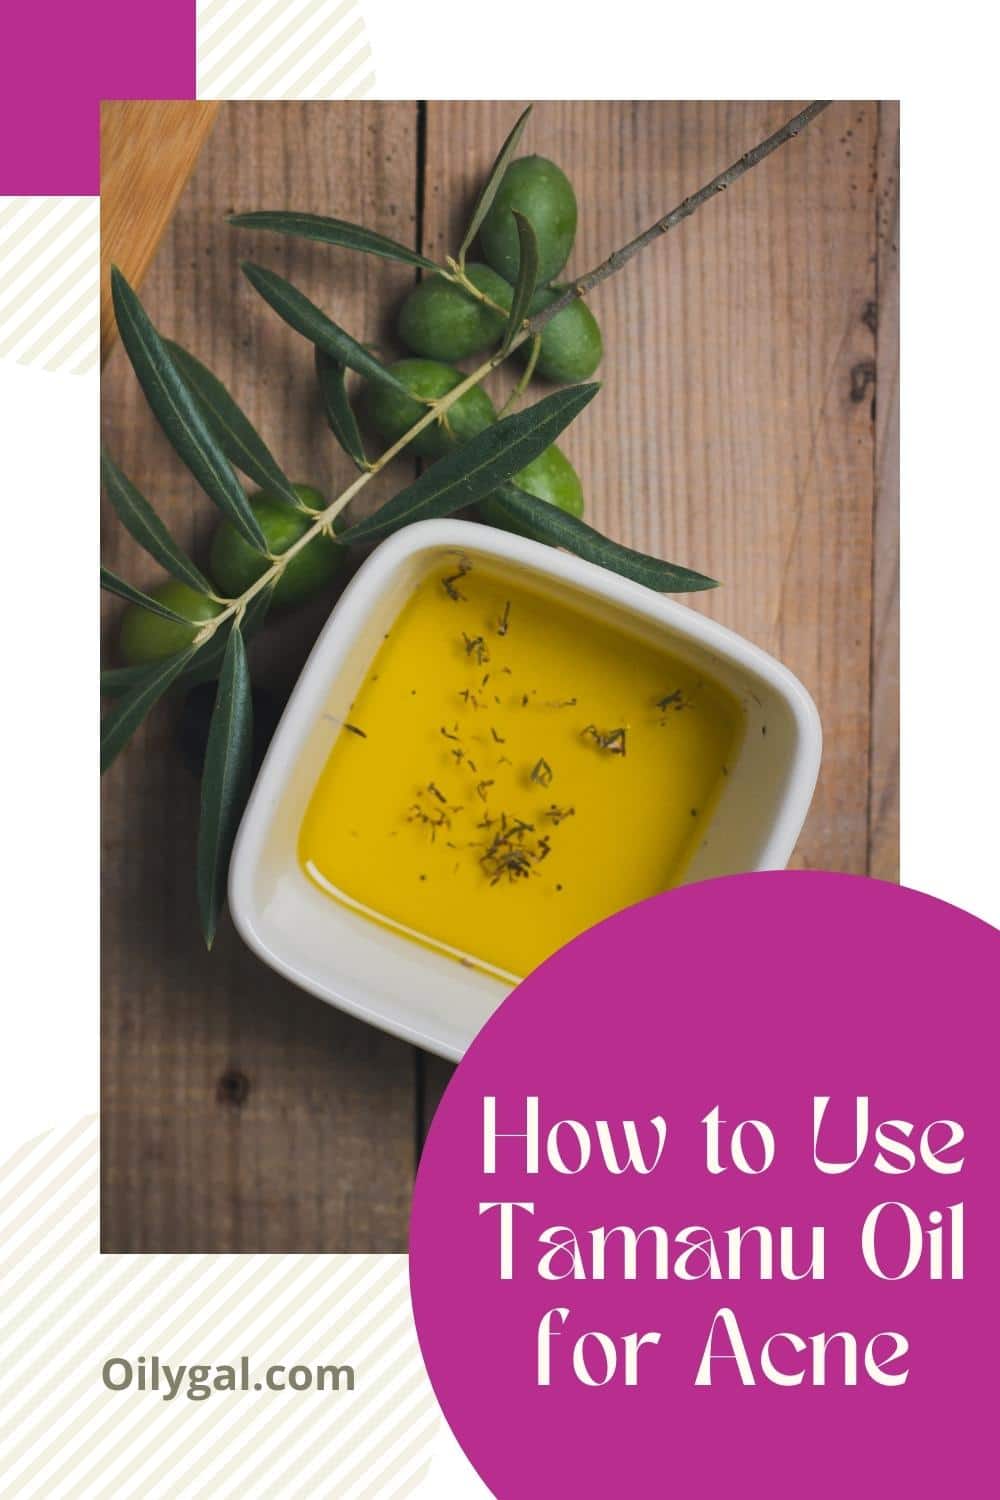 How to Use Tamanu Oil for Acne